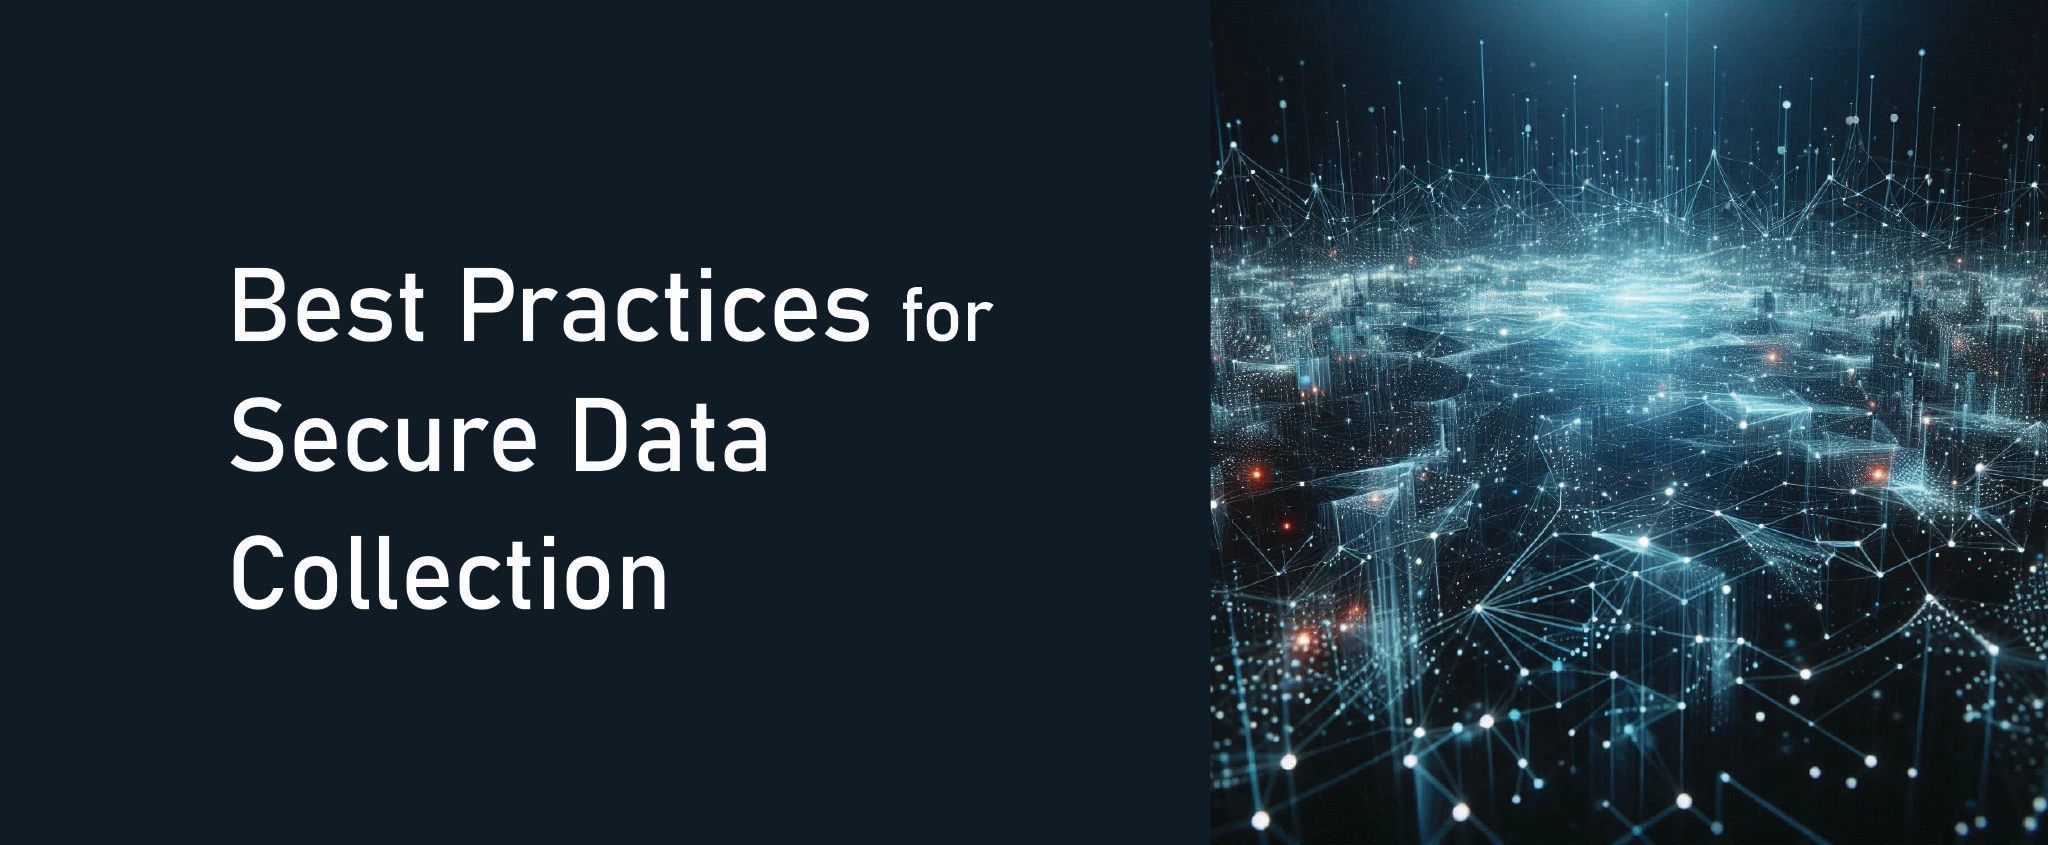 Best Practices for Secure Data Collection